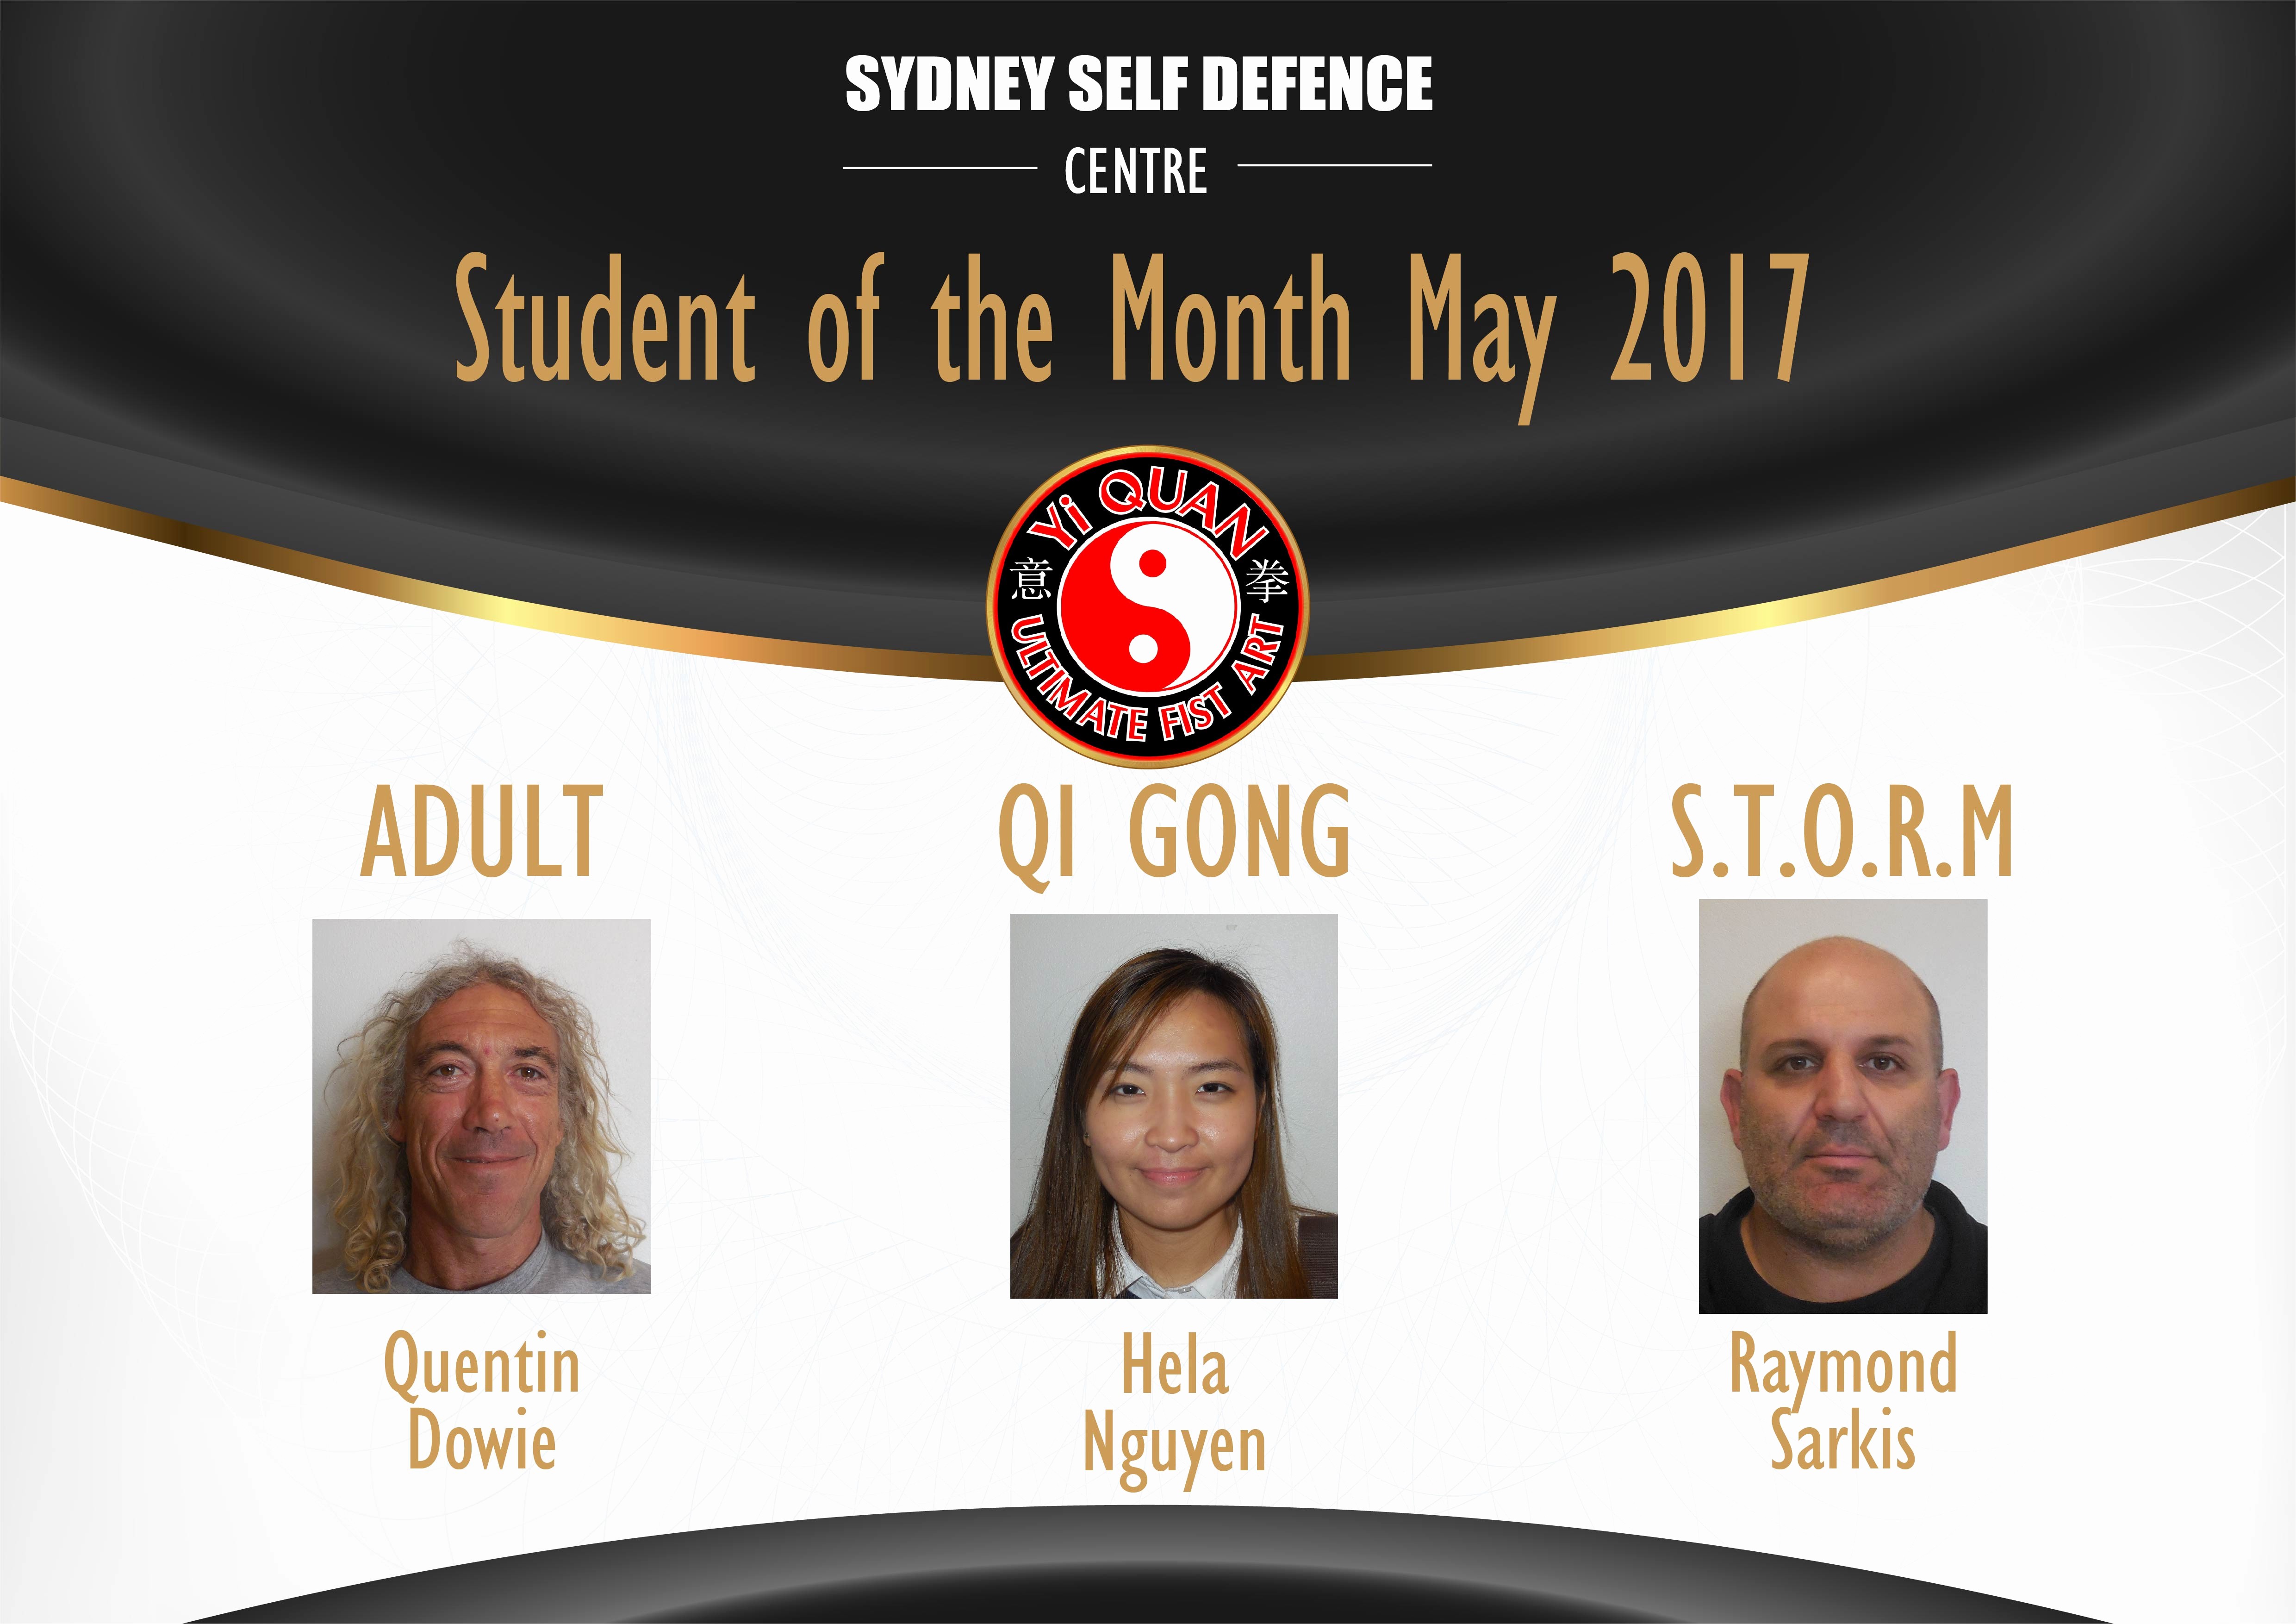 Student Of the Month Banner Fresh Students Of the Month May Sydney Self Defence Centre